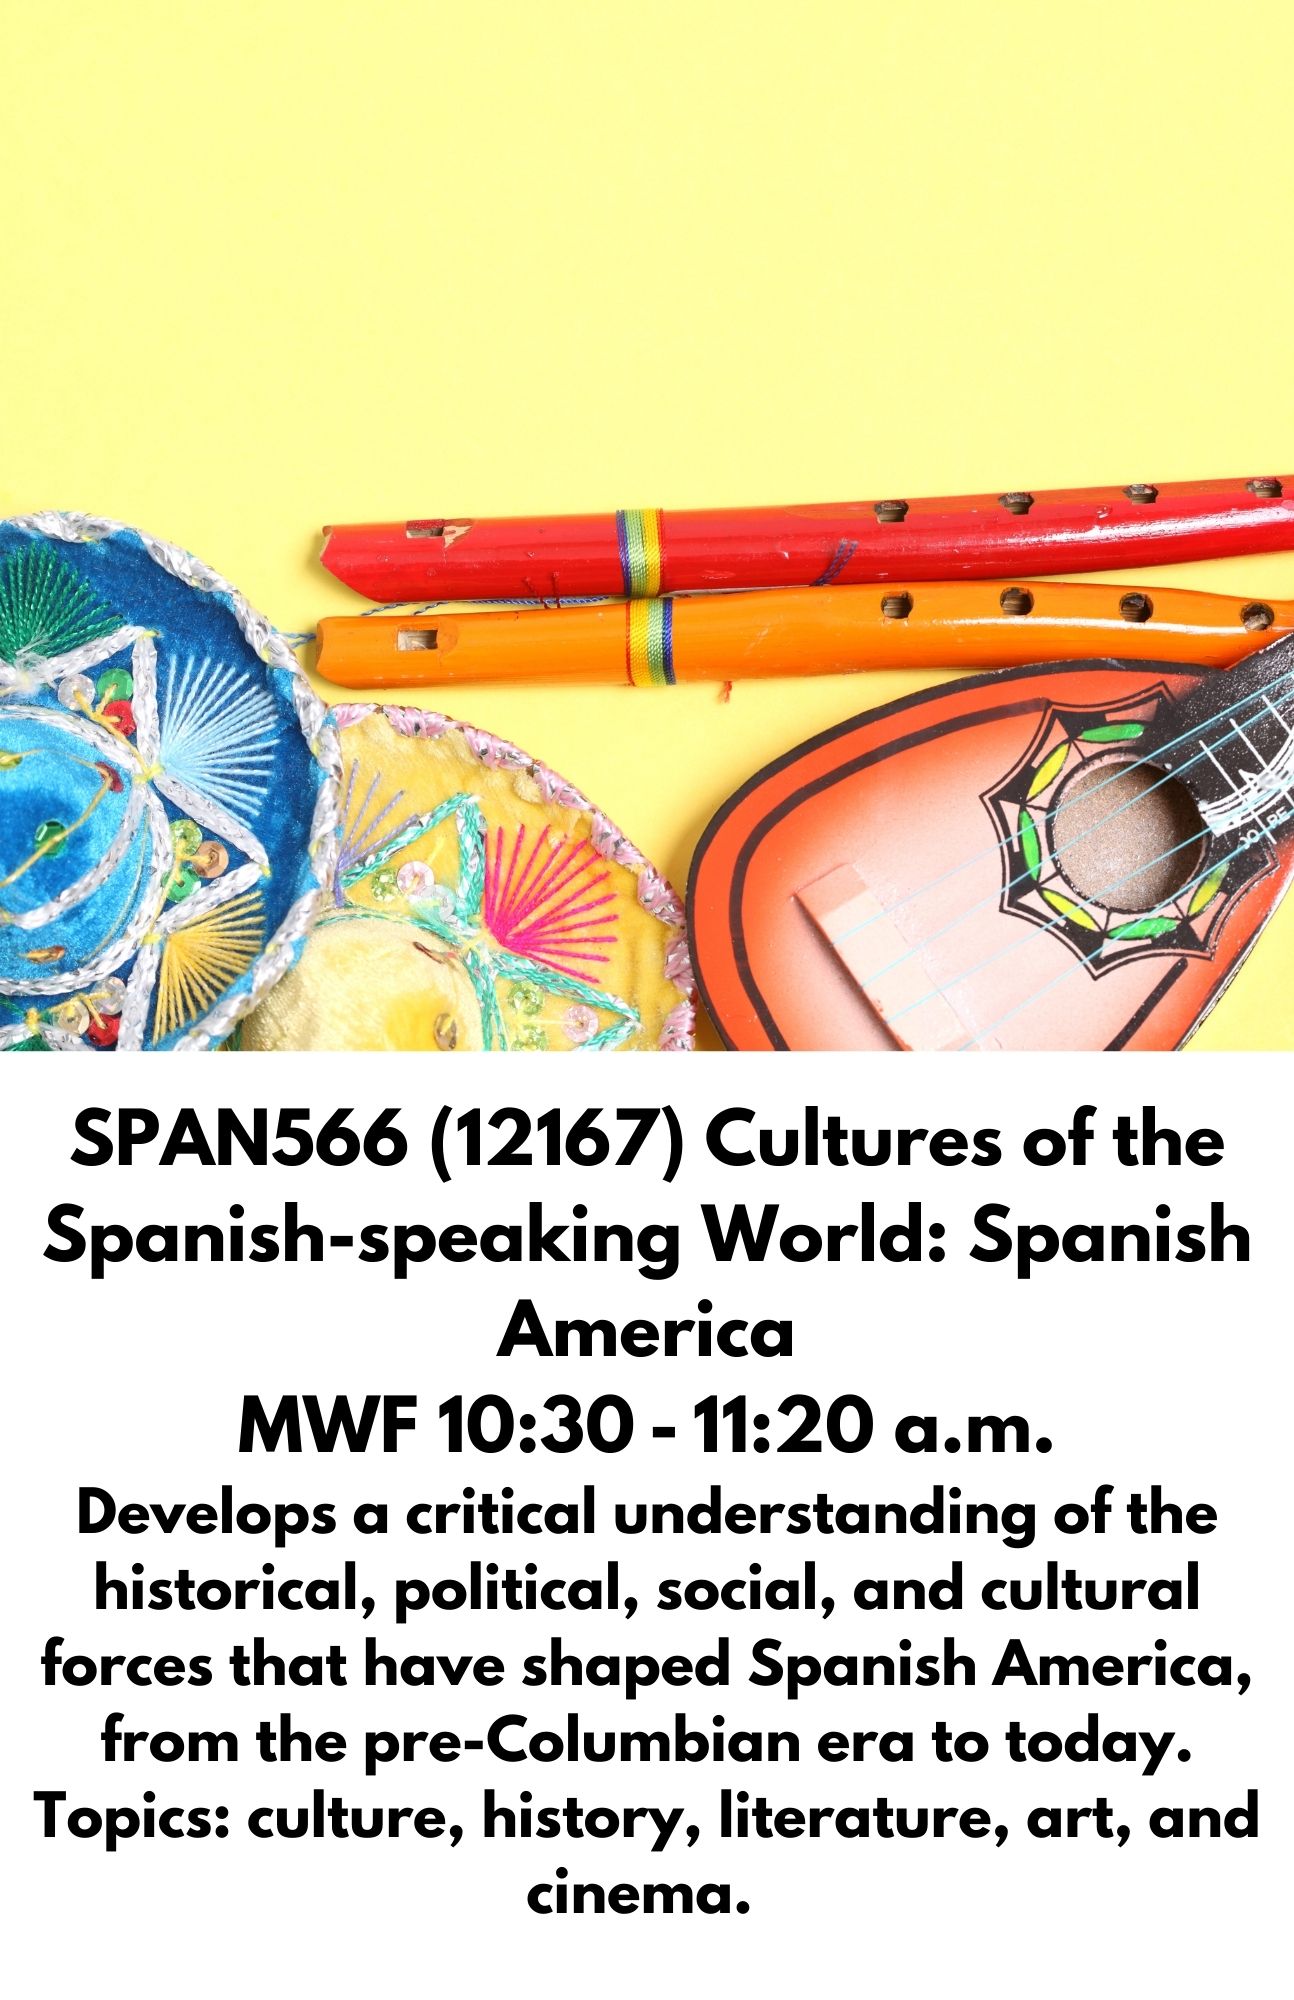 SPAN566 (12167) Cultures of the Spanish-speaking World: Spanish America MWF 10:30 - 11:20 a.m. Develops a critical understanding of the historical, political, social, and cultural forces that have shaped Spanish America, from the pre-Columbian era to today. Topics: culture, history, literature, art, and cinema.